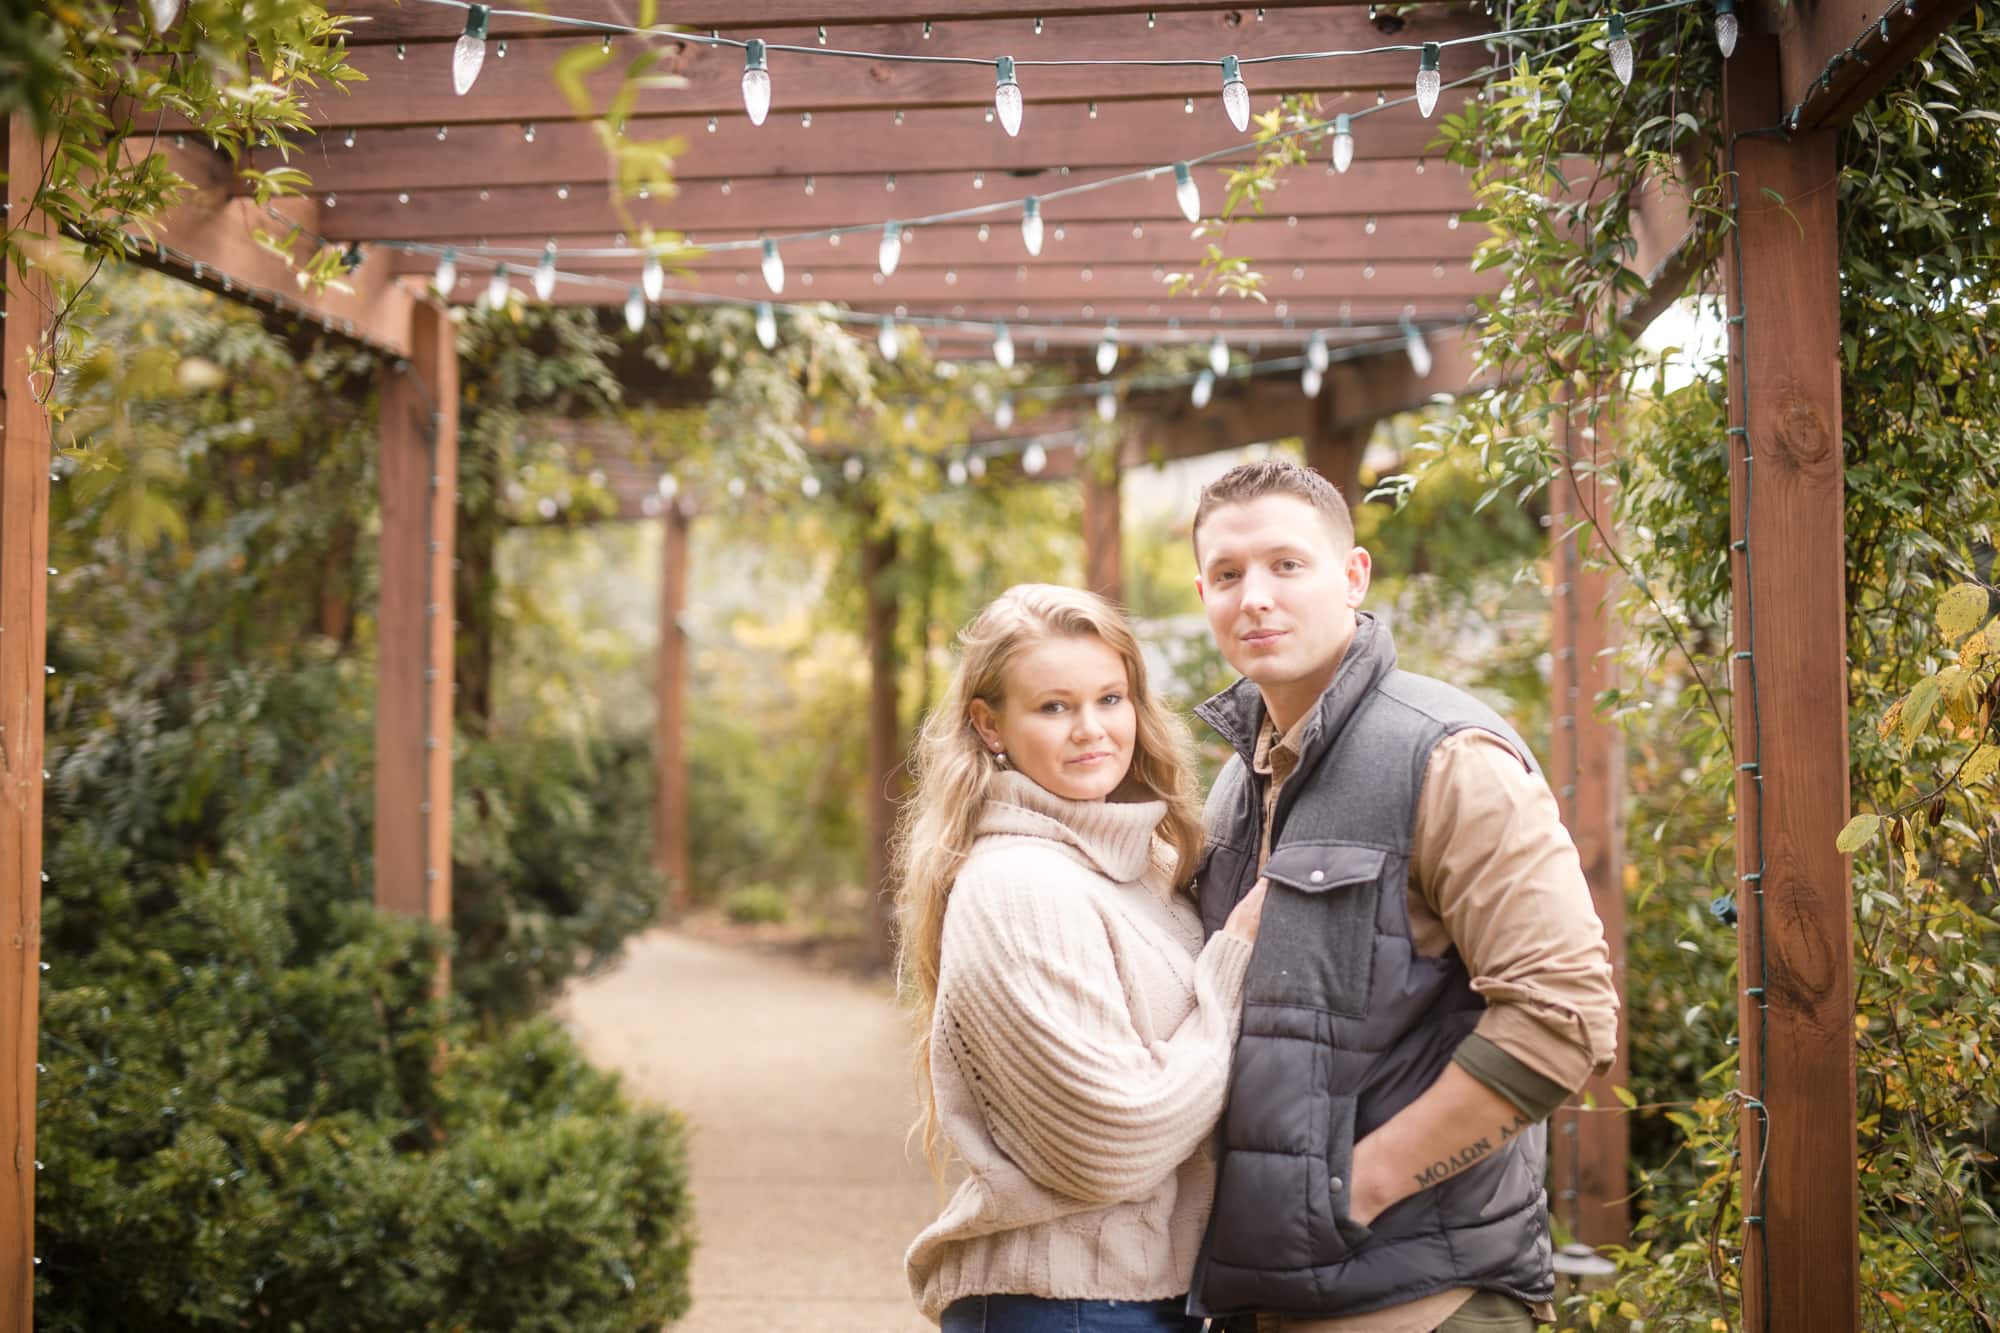 Couple posing affectionately for the camera under garden trellis at Biltmore Estate North Carolina photography done by Kathy Beaver.